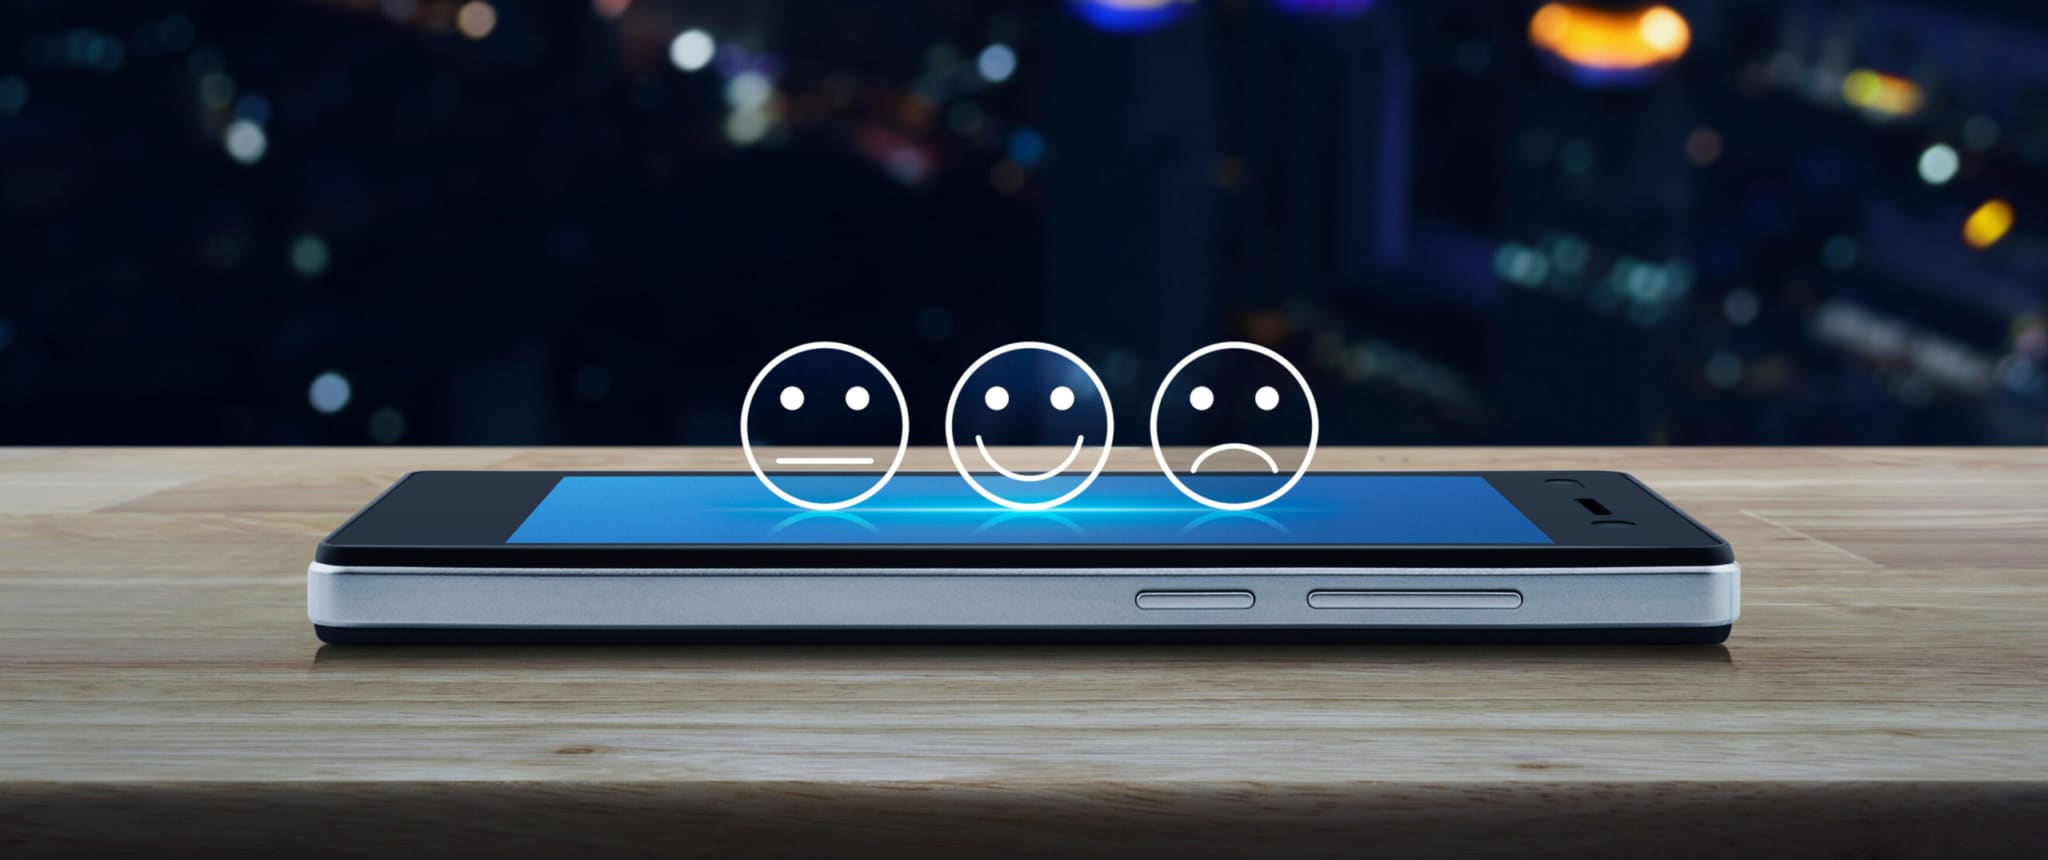 cell phone, smiling, sad and thoughtful face icons